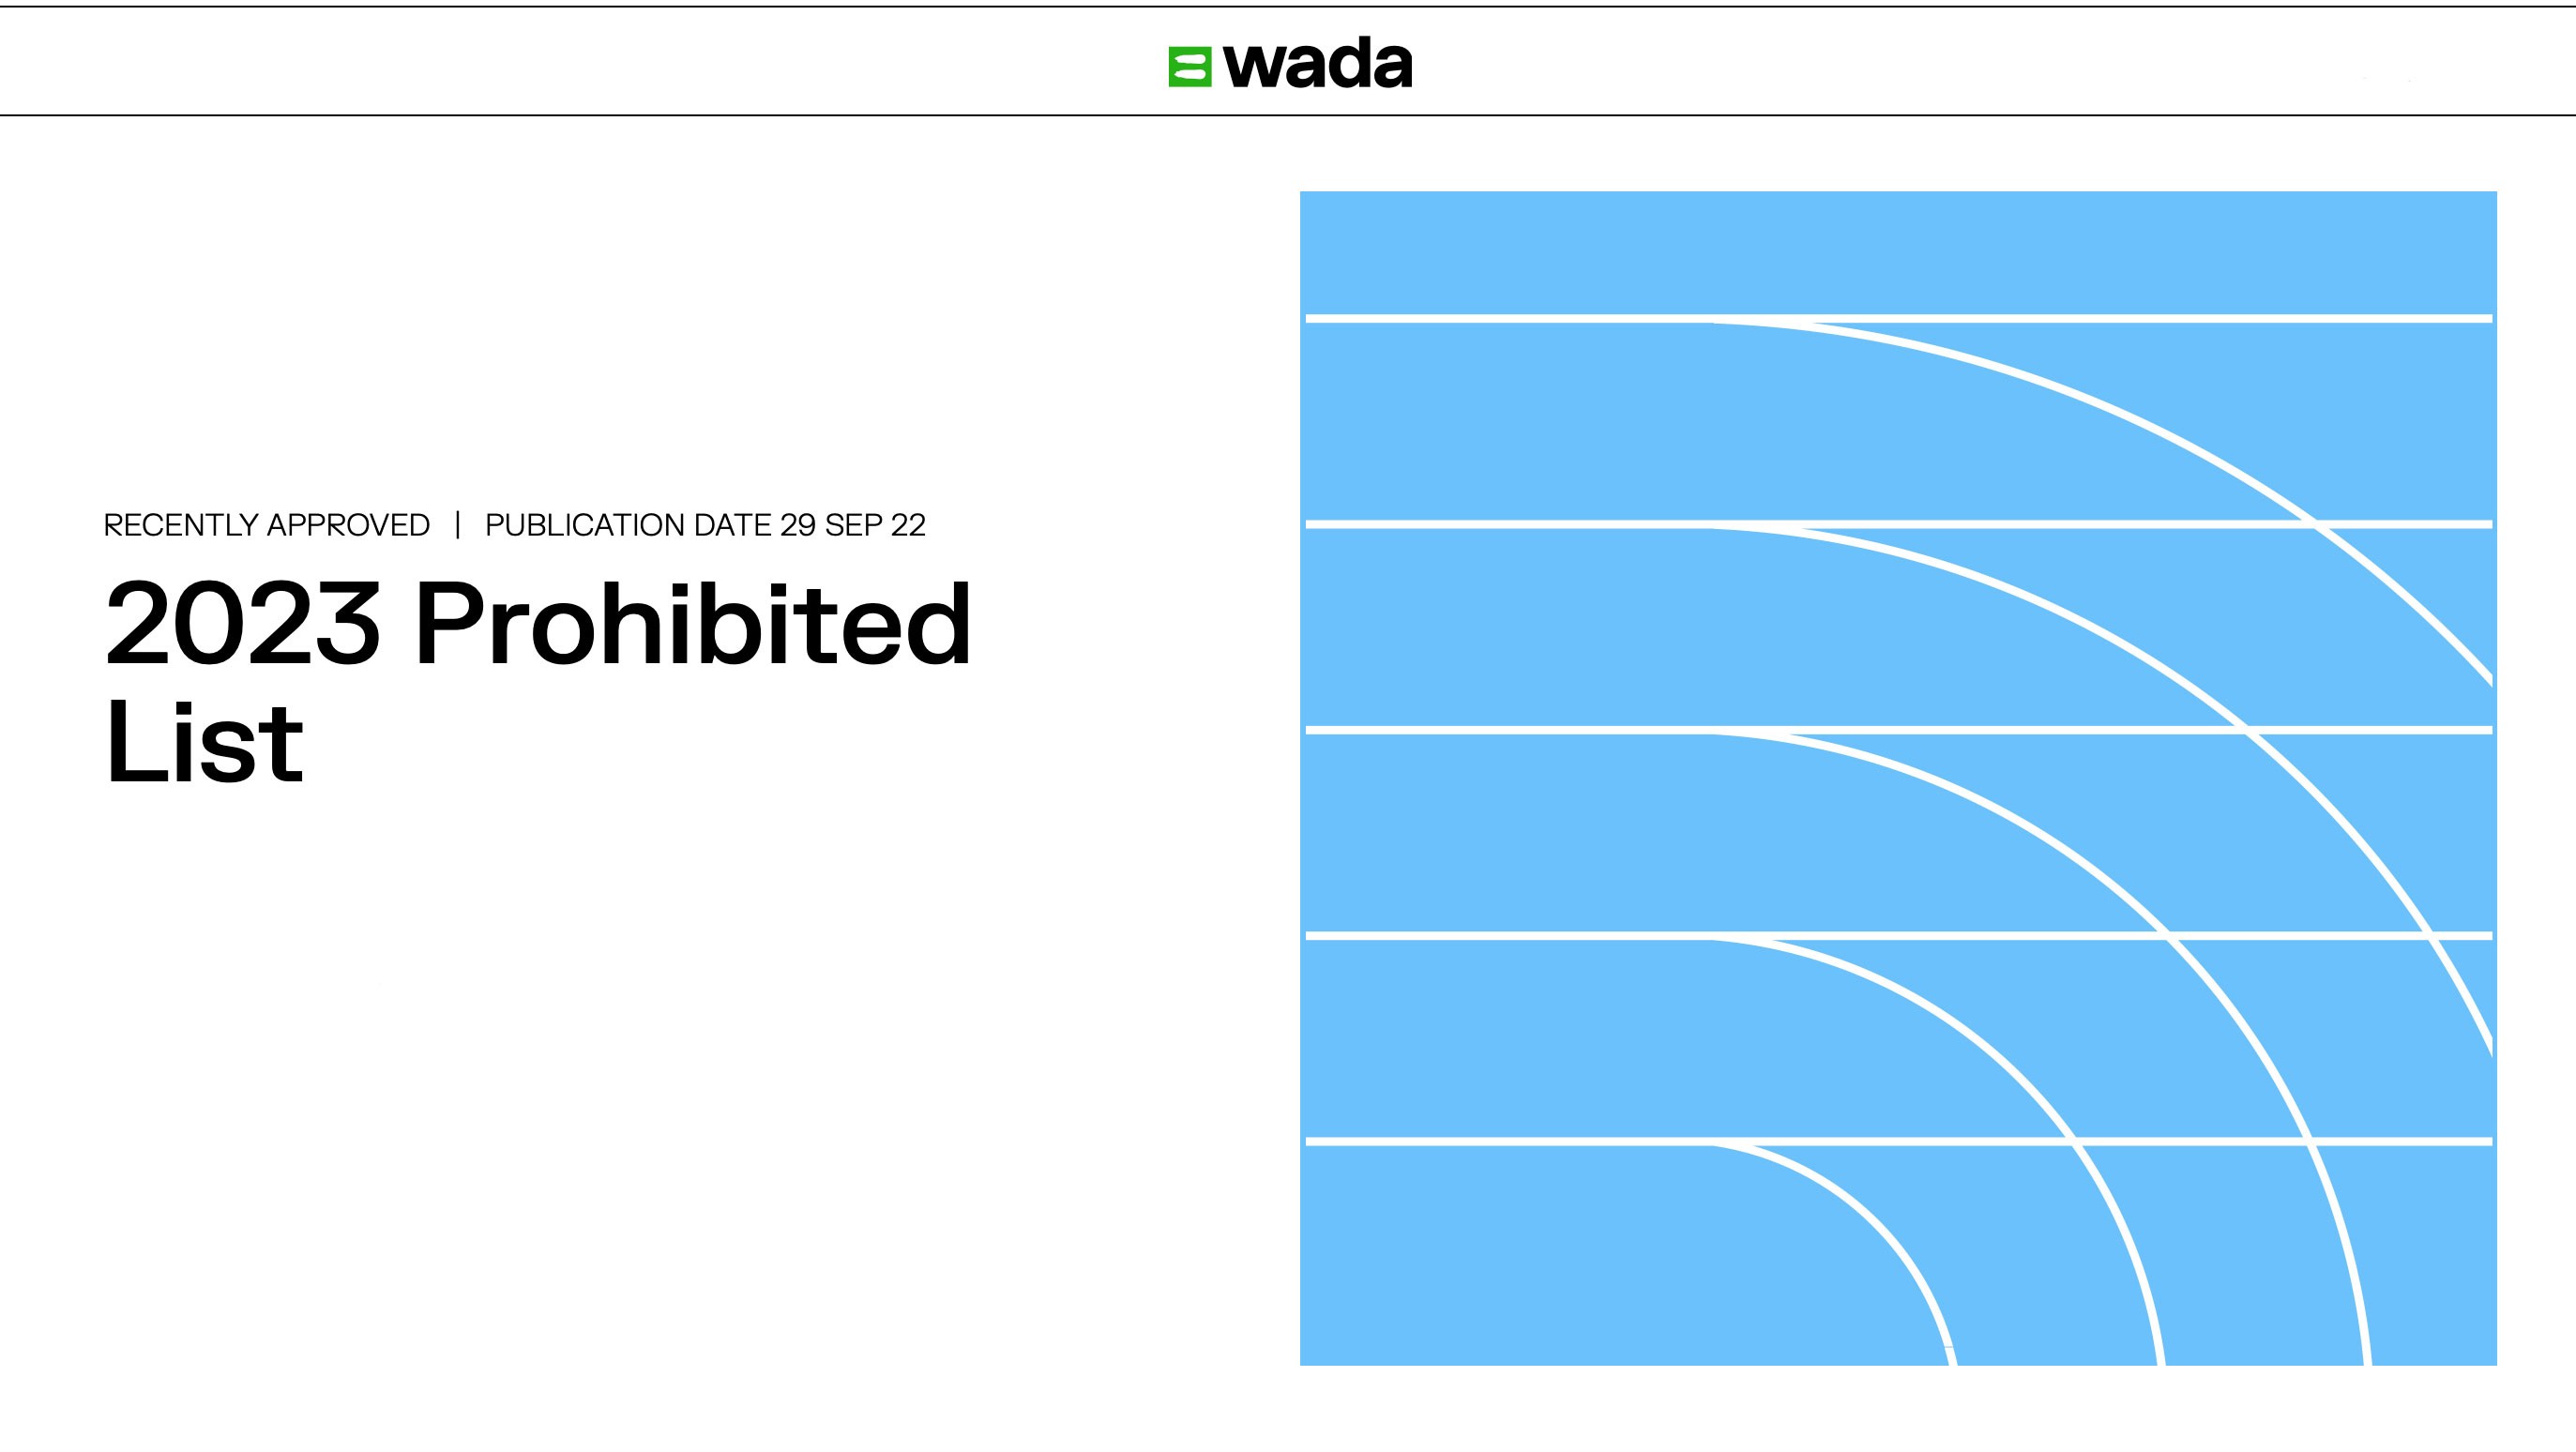 The WADA published the 2023 List of Prohibited Substances and Methods